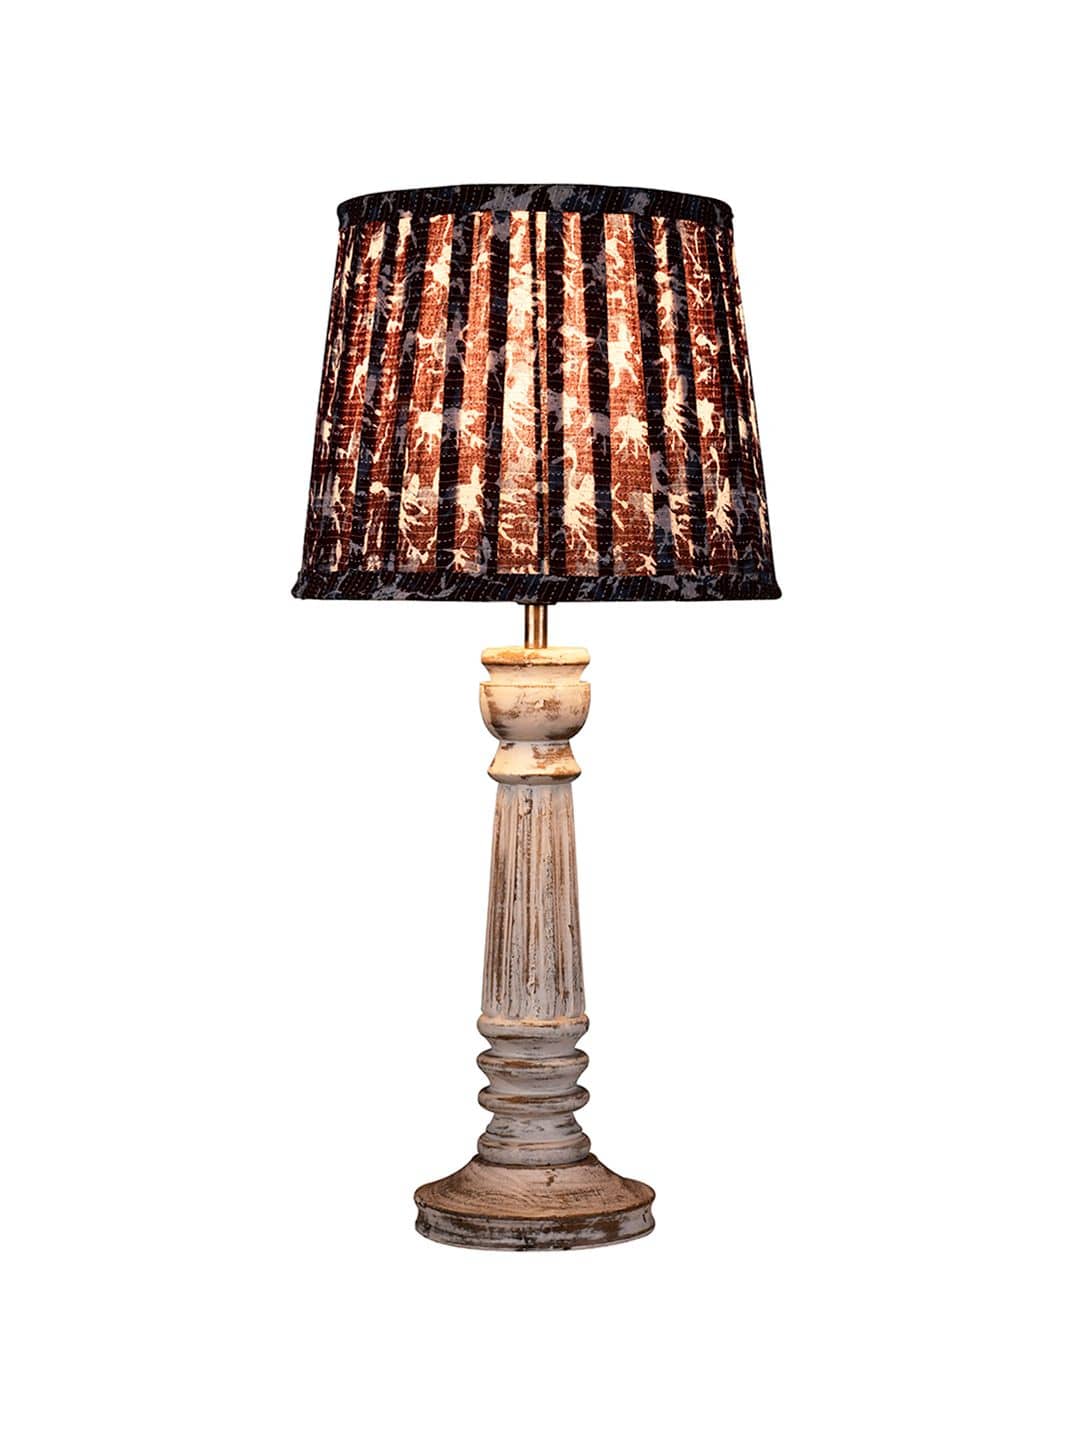 Wooden Pillar White lamp with pleeted Colorful Soft Shade